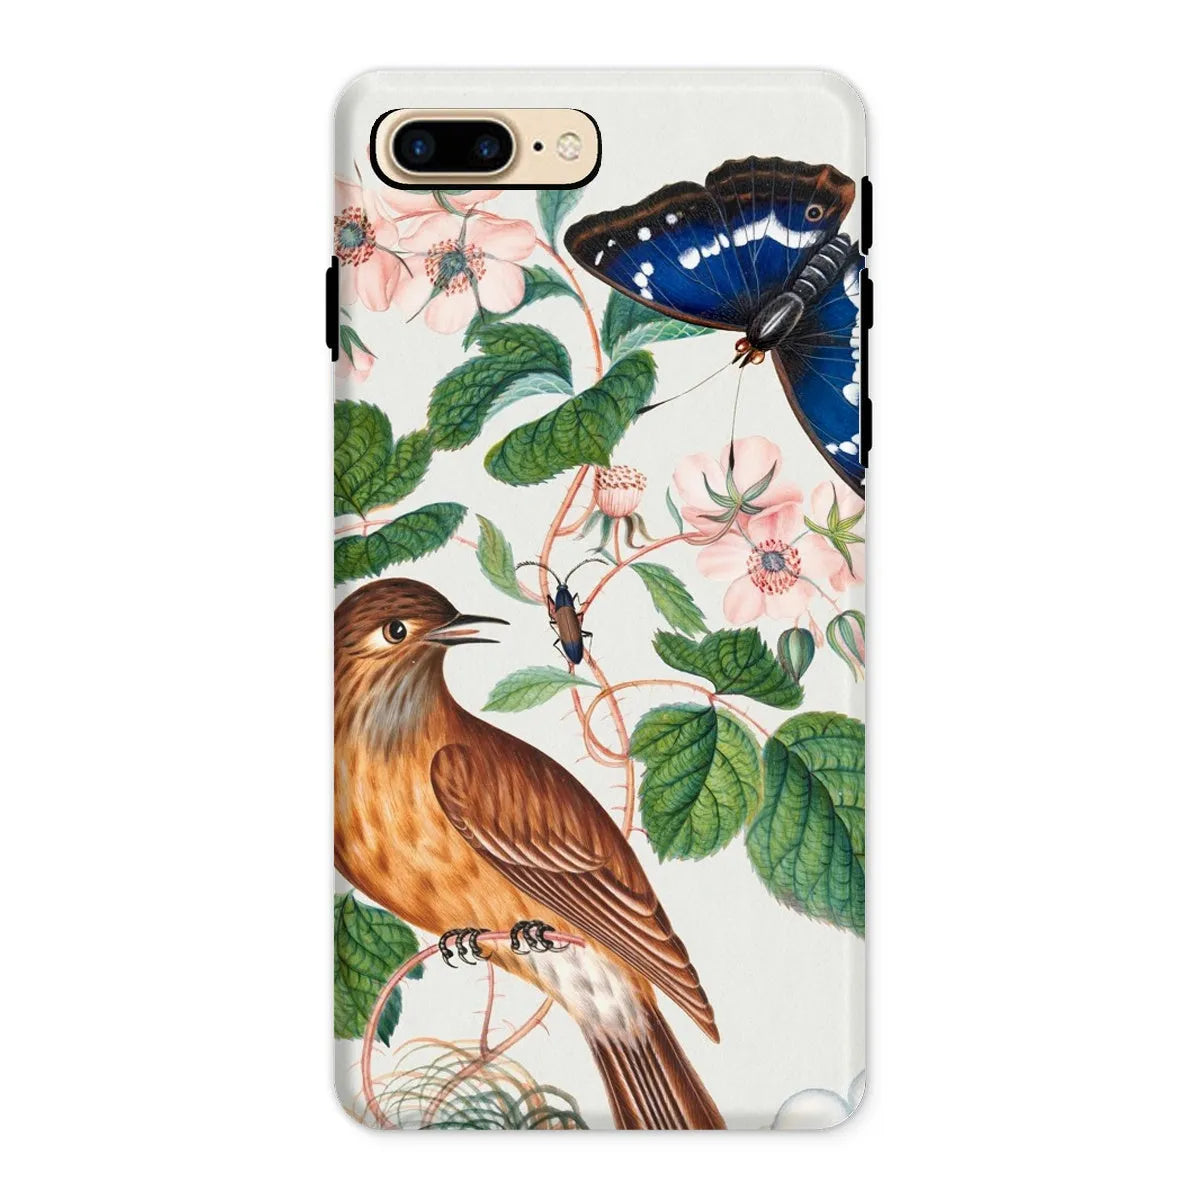 Flycatcher Emperor And Beetle - Art Phone Case - James Bolton - Iphone 8 Plus / Matte - Mobile Phone Cases - Aesthetic